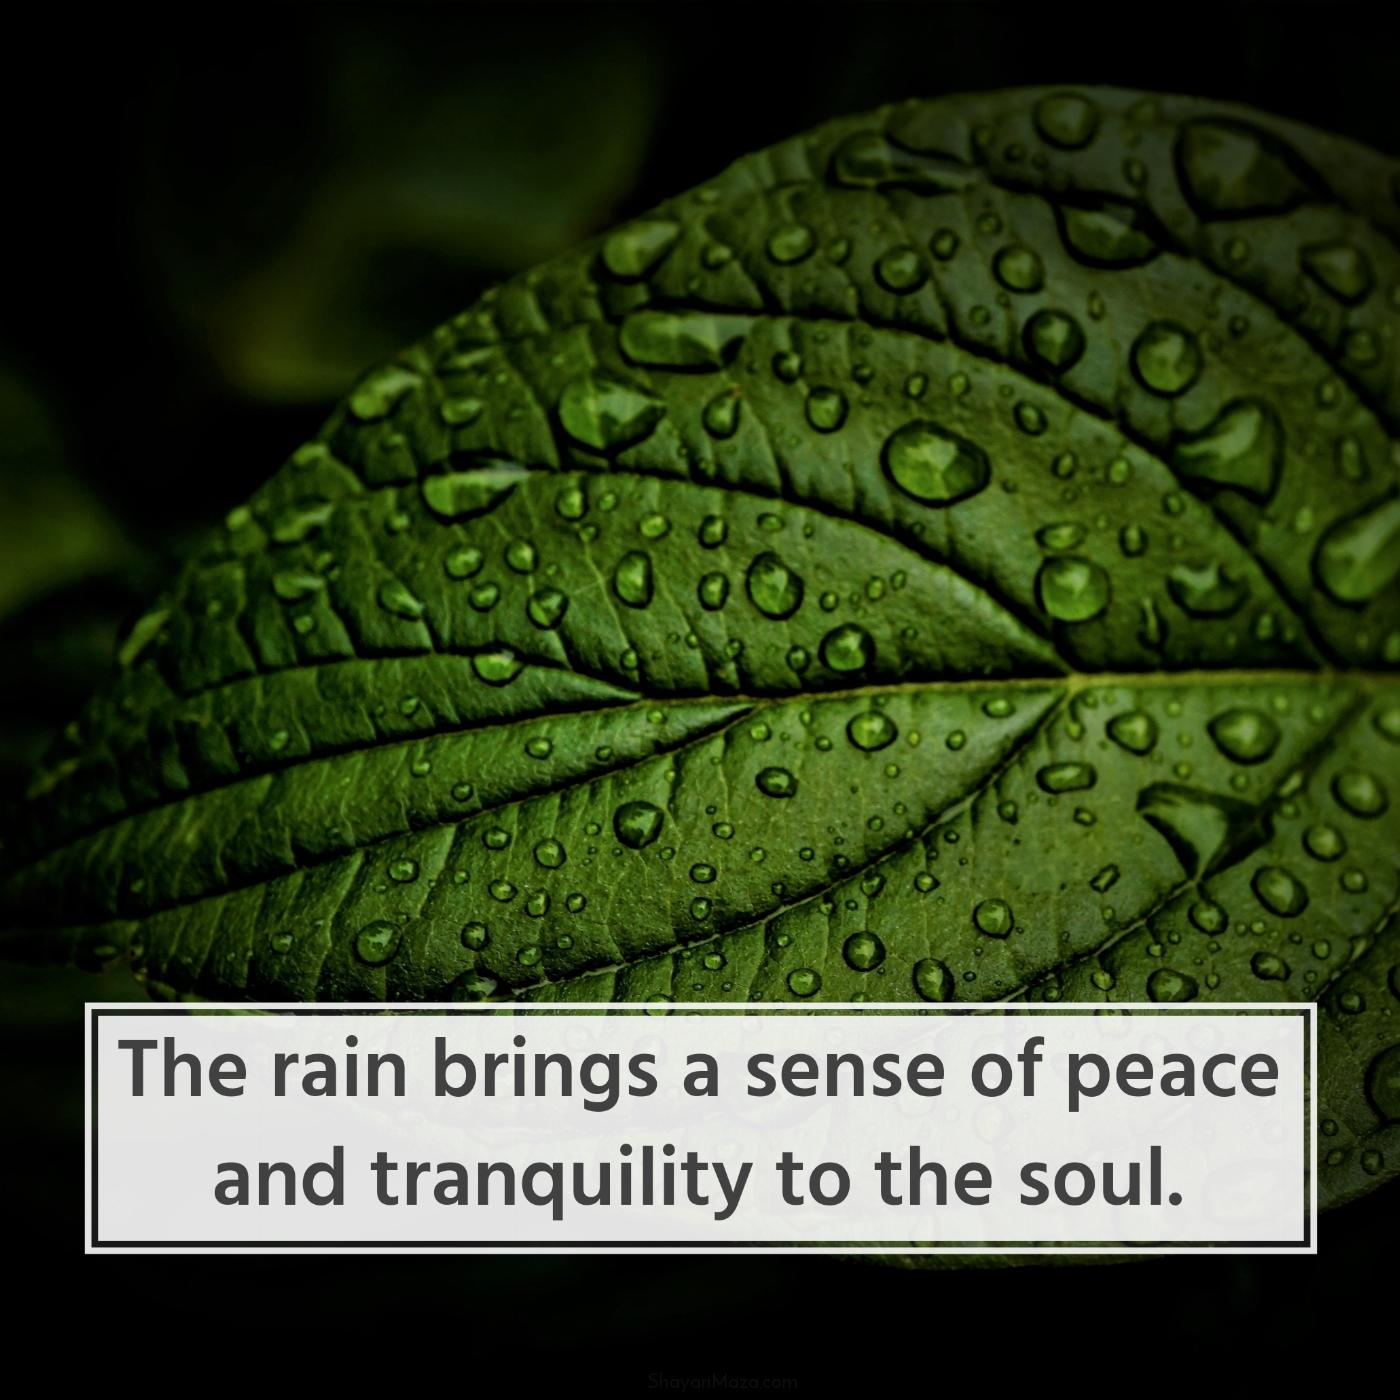 The rain brings a sense of peace and tranquility to the soul